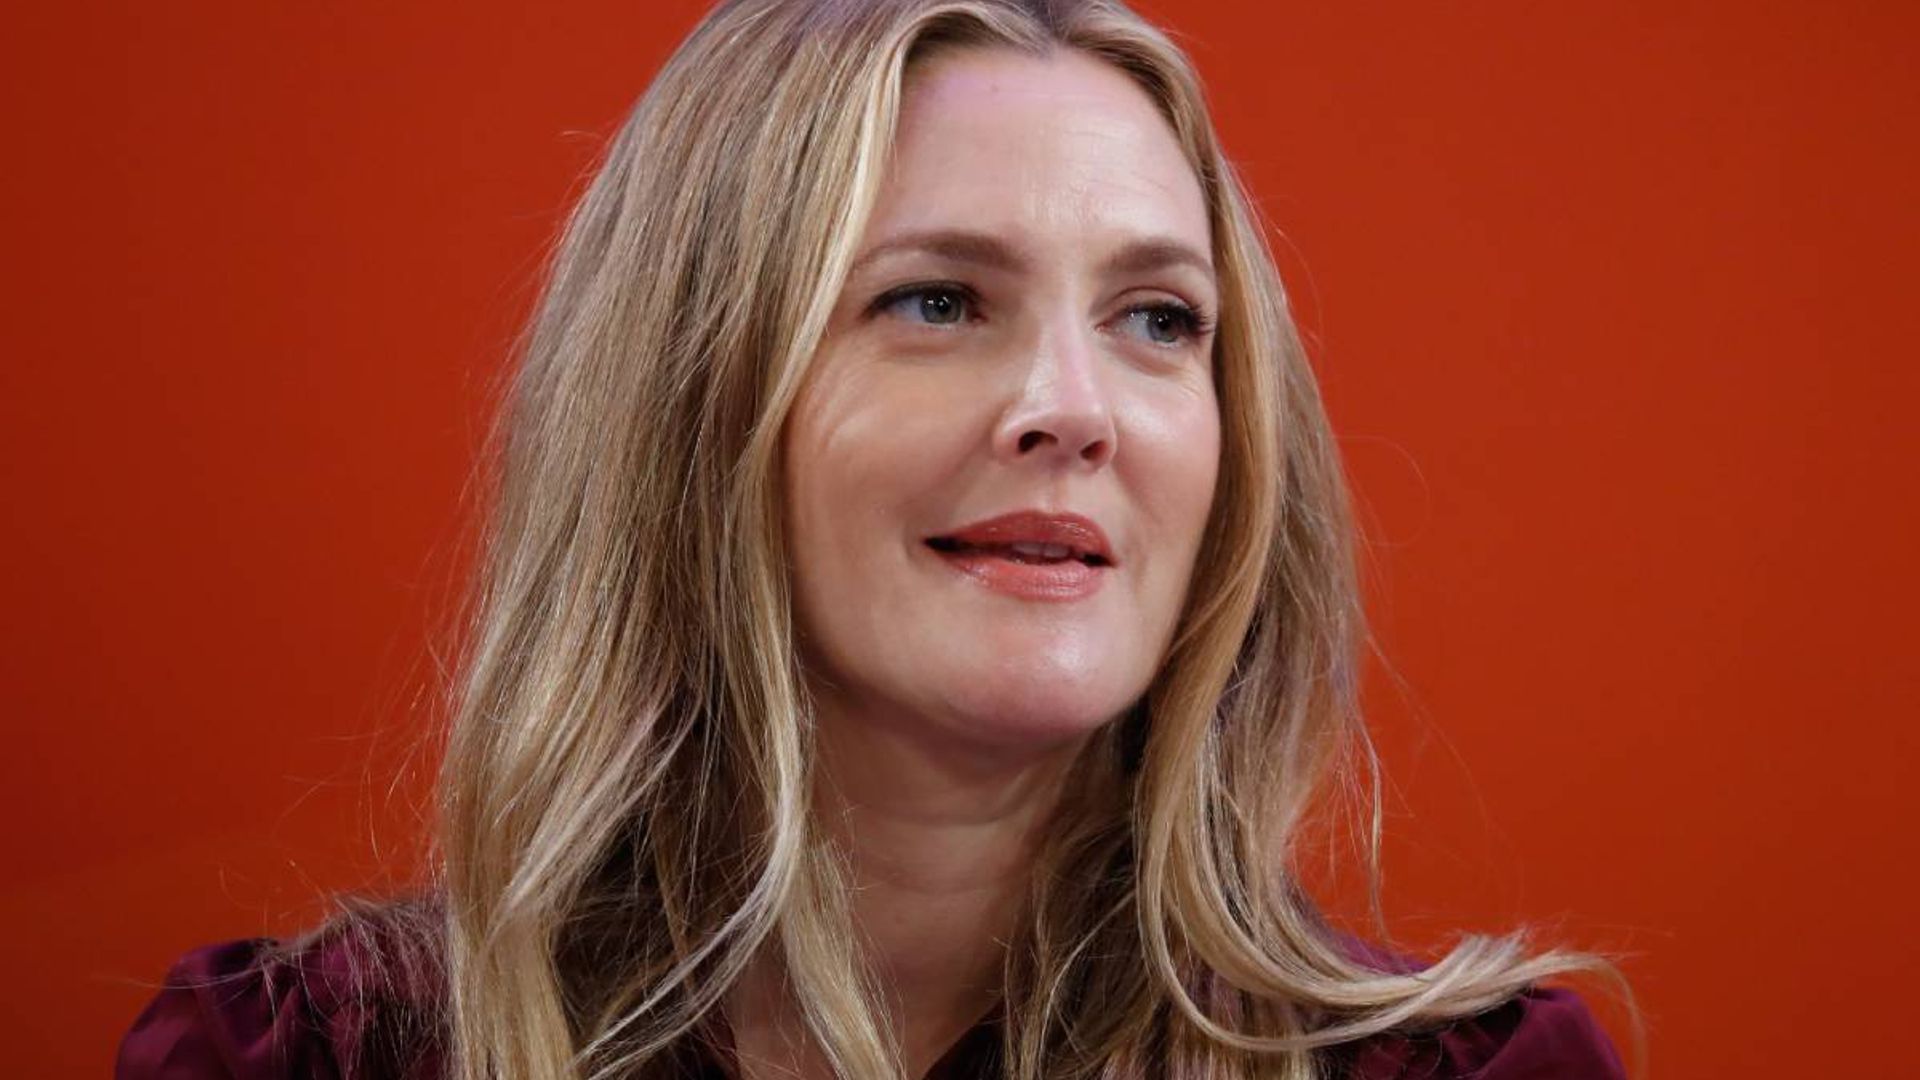 Drew Barrymore shares photo of her 'crying' in relatable photo to mark start of the year